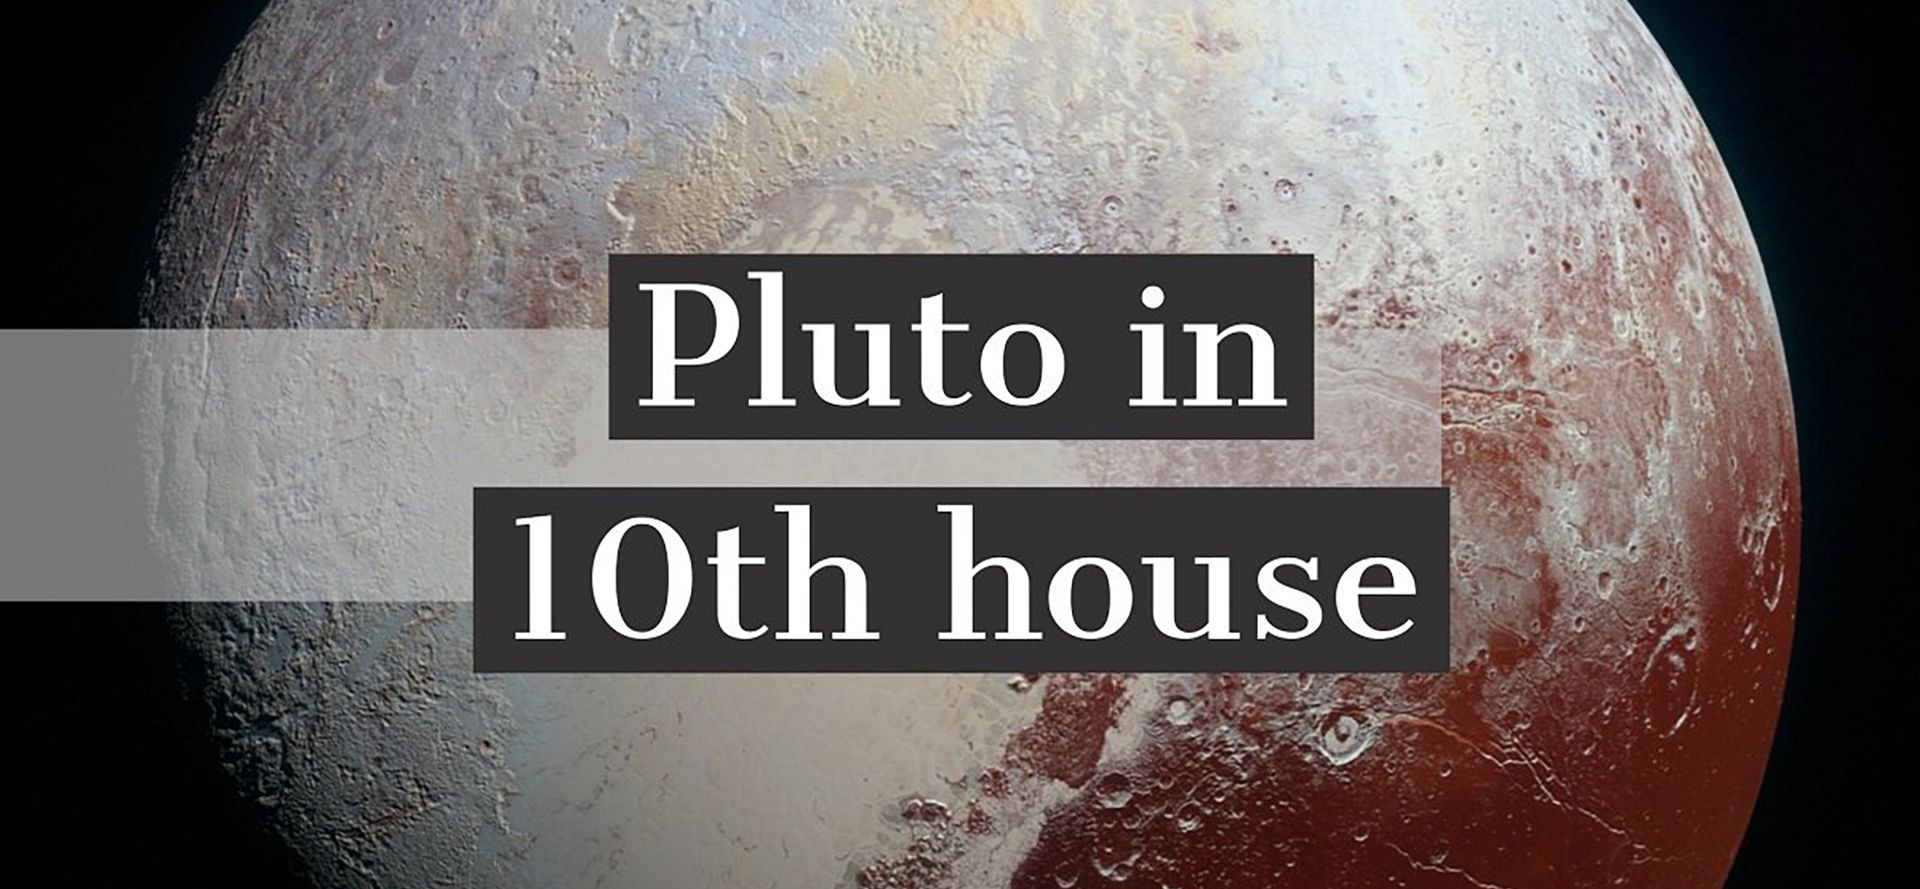 Pluto in 10th house.